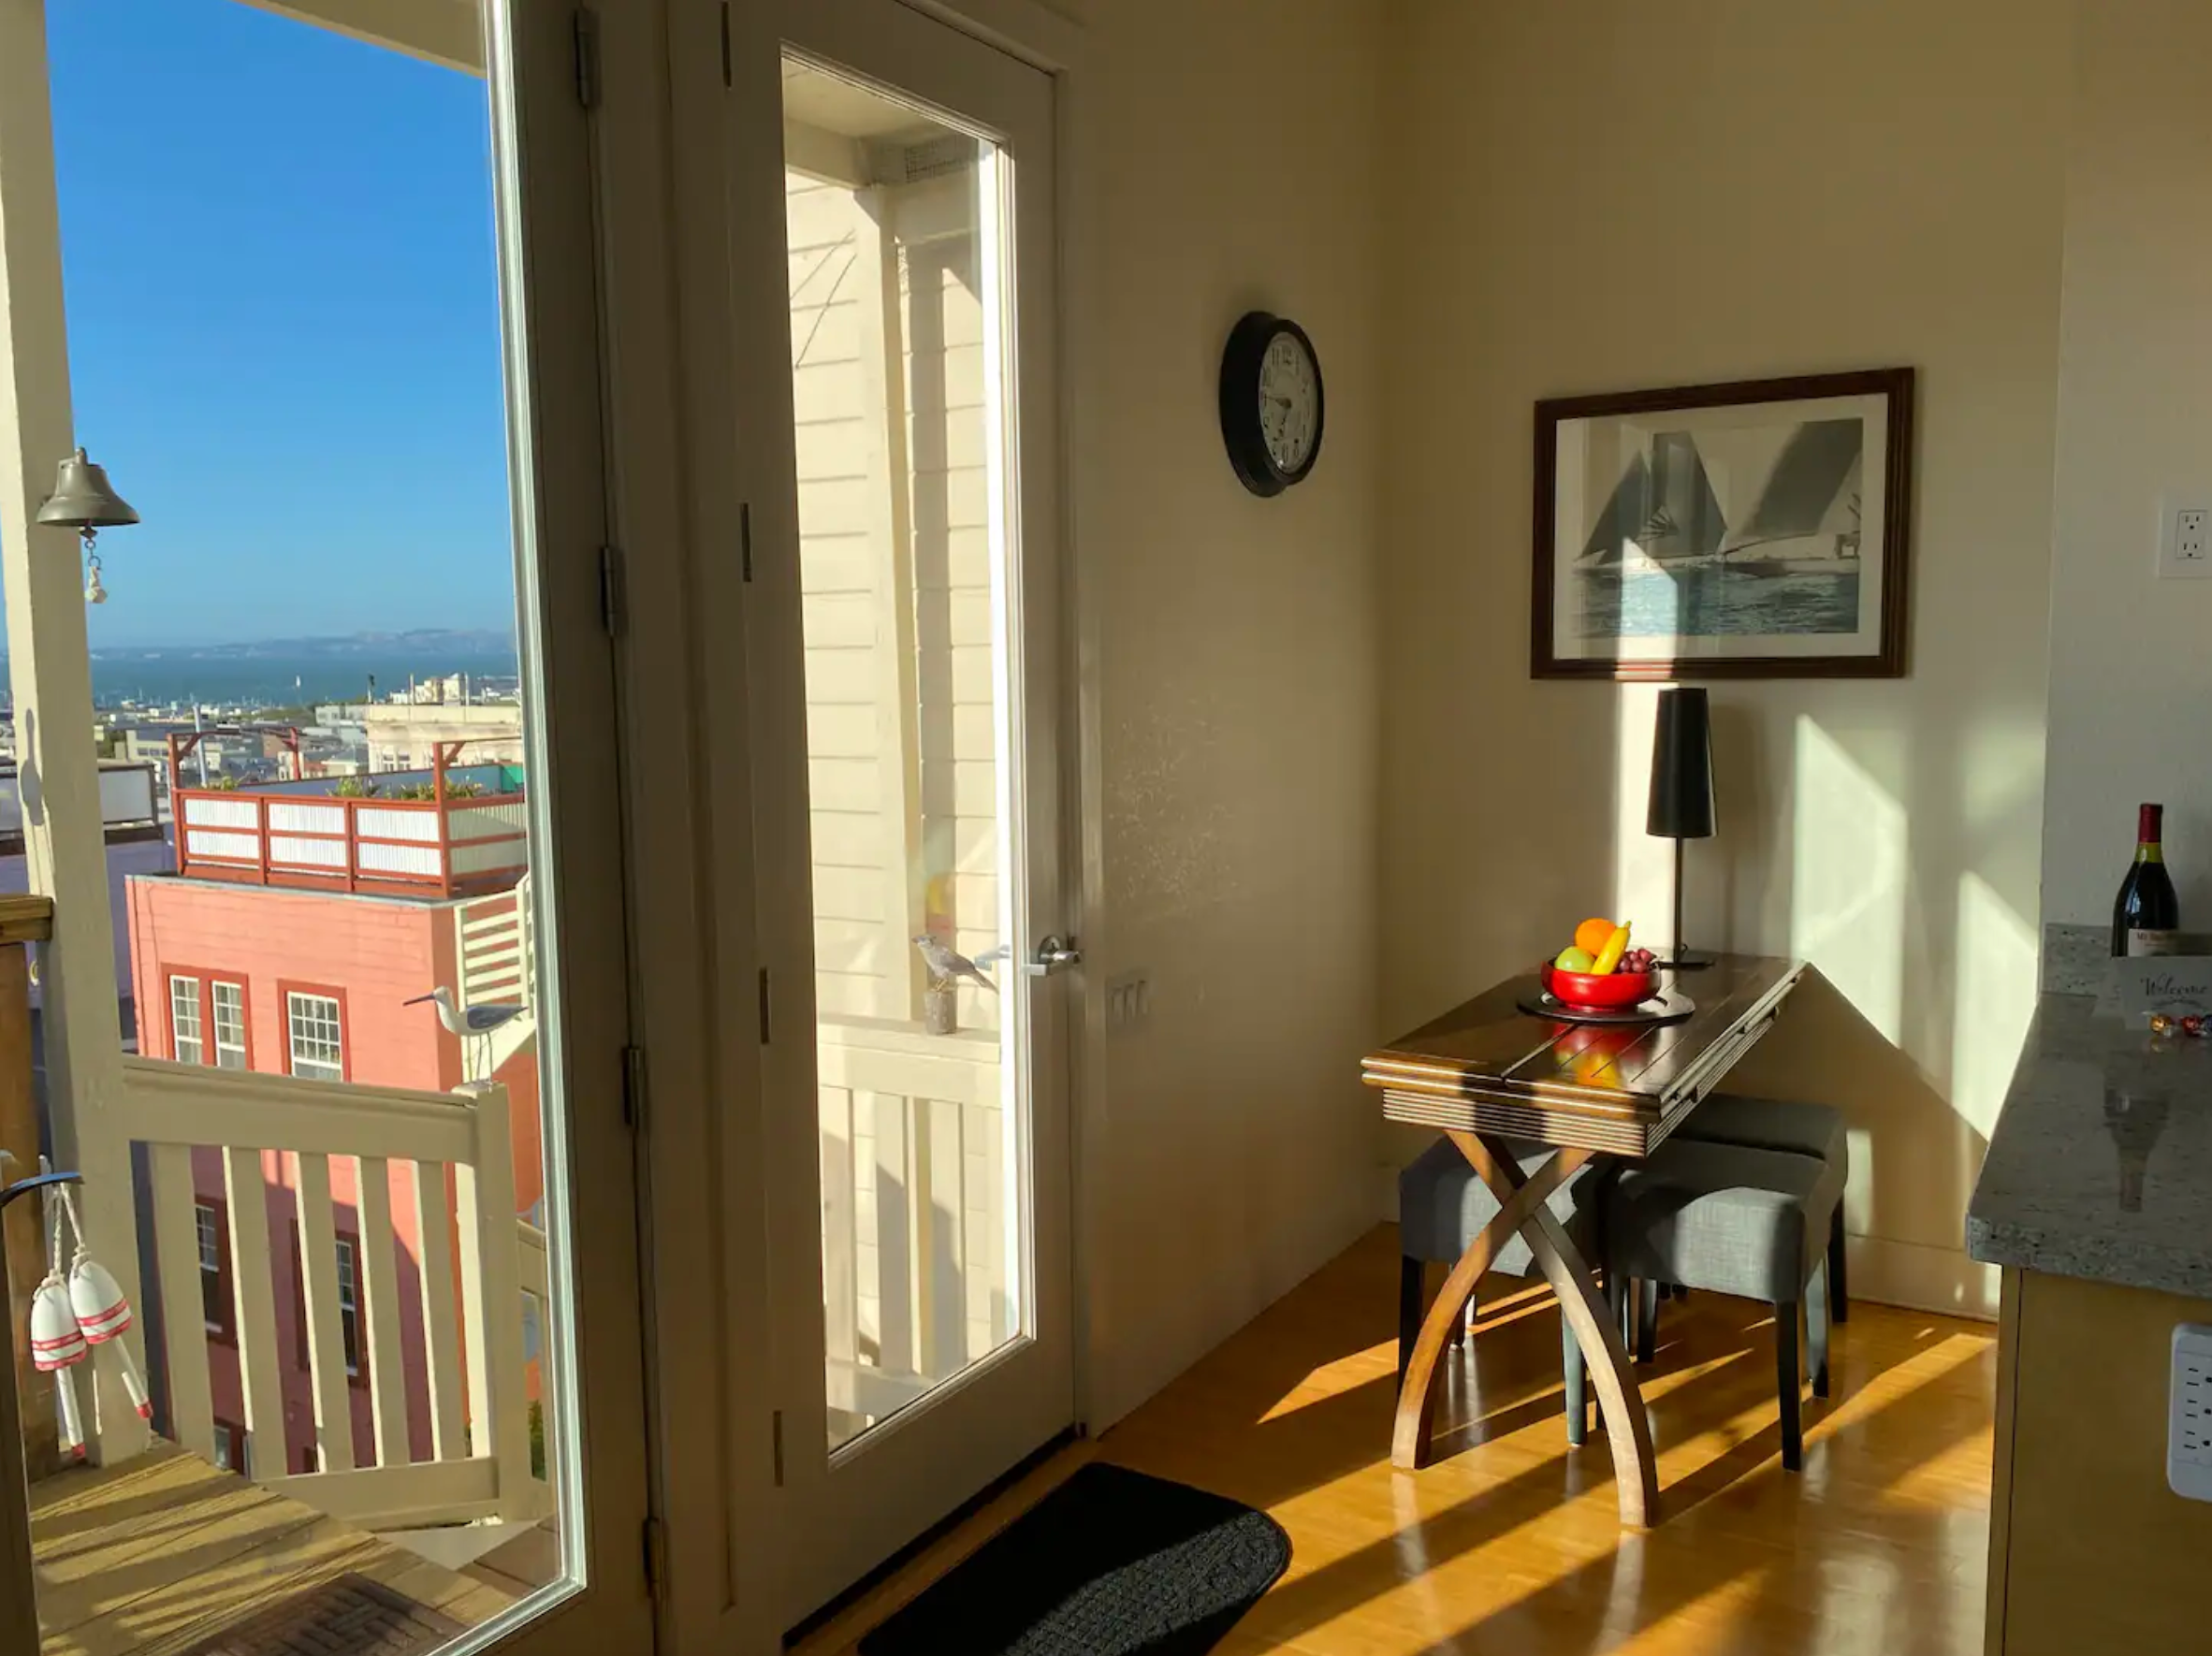 <p><strong>Bed & bath:</strong> 2 bedrooms, 2 baths<br> <strong>Top amenities:</strong> Prime location, balcony with water views, patio</p> <p>Located in the desirable neighborhood of North Beach with a spectacular view of the bay, this two-bedroom boasts a prime address for first timers—it’s within walking distance of Washington Square, Fisherman's Wharf, Lombard Street, Chinatown, and Ghirardelli Square. The rental is full of comfortable and convenient amenities too, including in-unit laundry, Wi-Fi, black-out shades, hardwood floors, skylights, and more. The cozy two-bedroom features two queen beds, a backyard patio, and a balcony perfect for early morning coffee and enjoying the view.</p> $446, Airbnb (starting price). <a href="https://www.airbnb.com/rooms/28074409">Get it now!</a><p>Sign up to receive the latest news, expert tips, and inspiration on all things travel</p><a href="https://www.cntraveler.com/newsletter/the-daily?sourceCode=msnsend">Inspire Me</a>